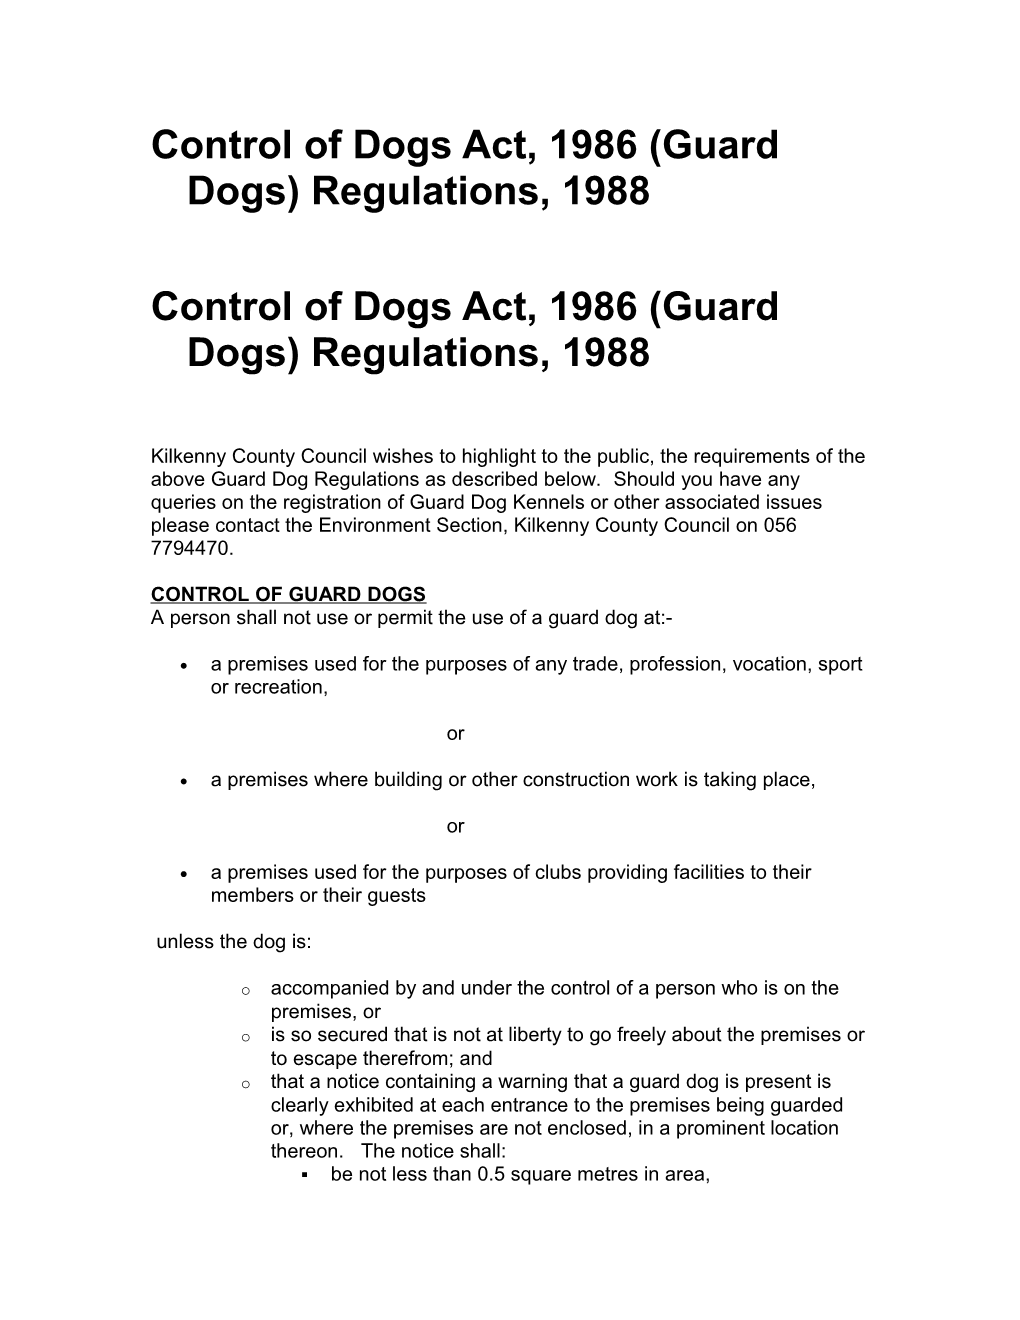 Control of Dogs Act, 1986 (Guard Dogs) Regulations, 1988